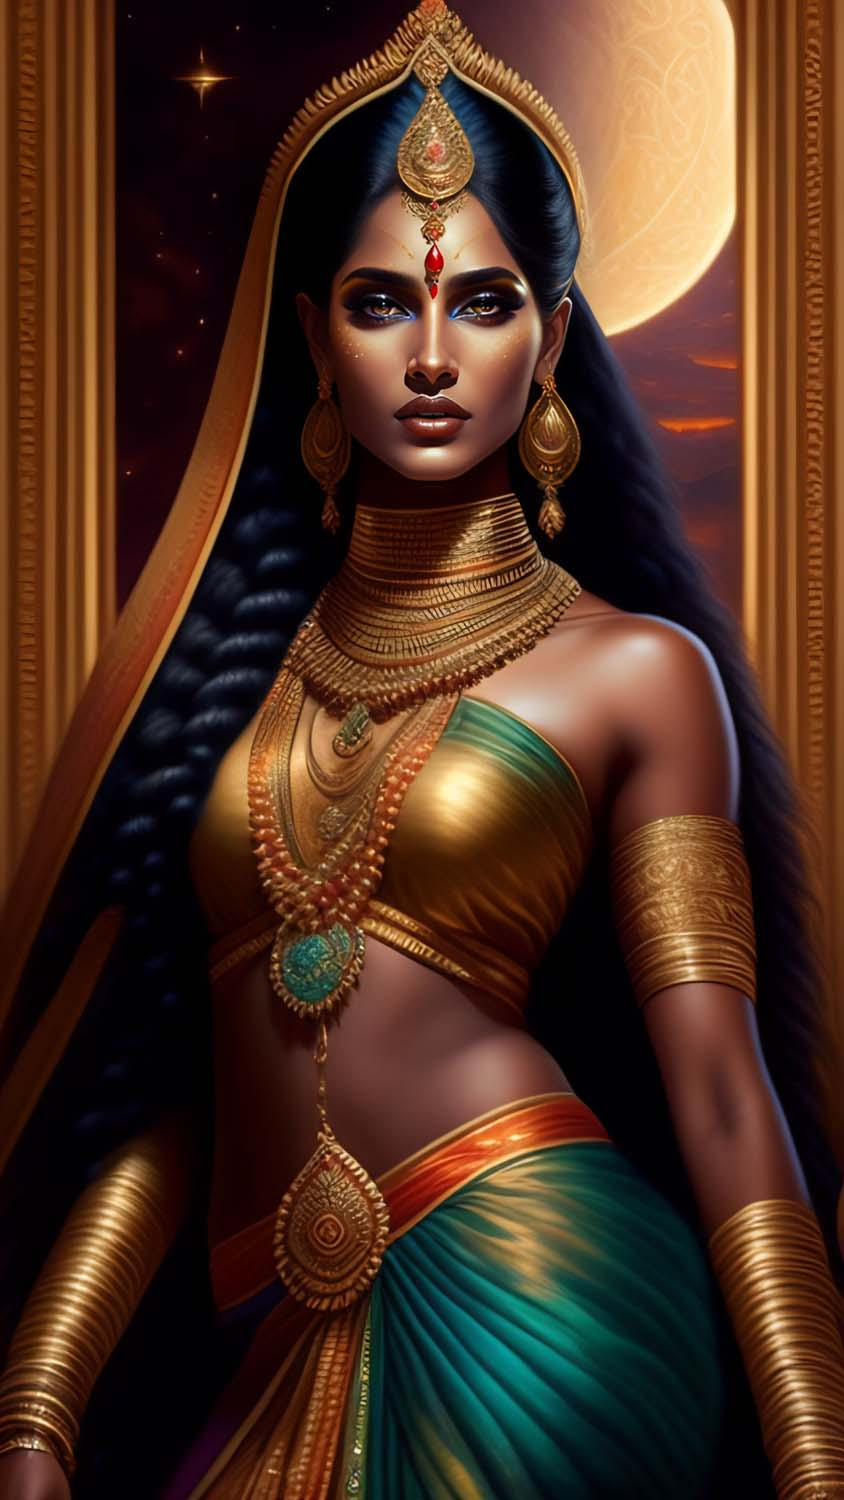 Indian Woman IPhone Wallpaper HD  IPhone Wallpapers